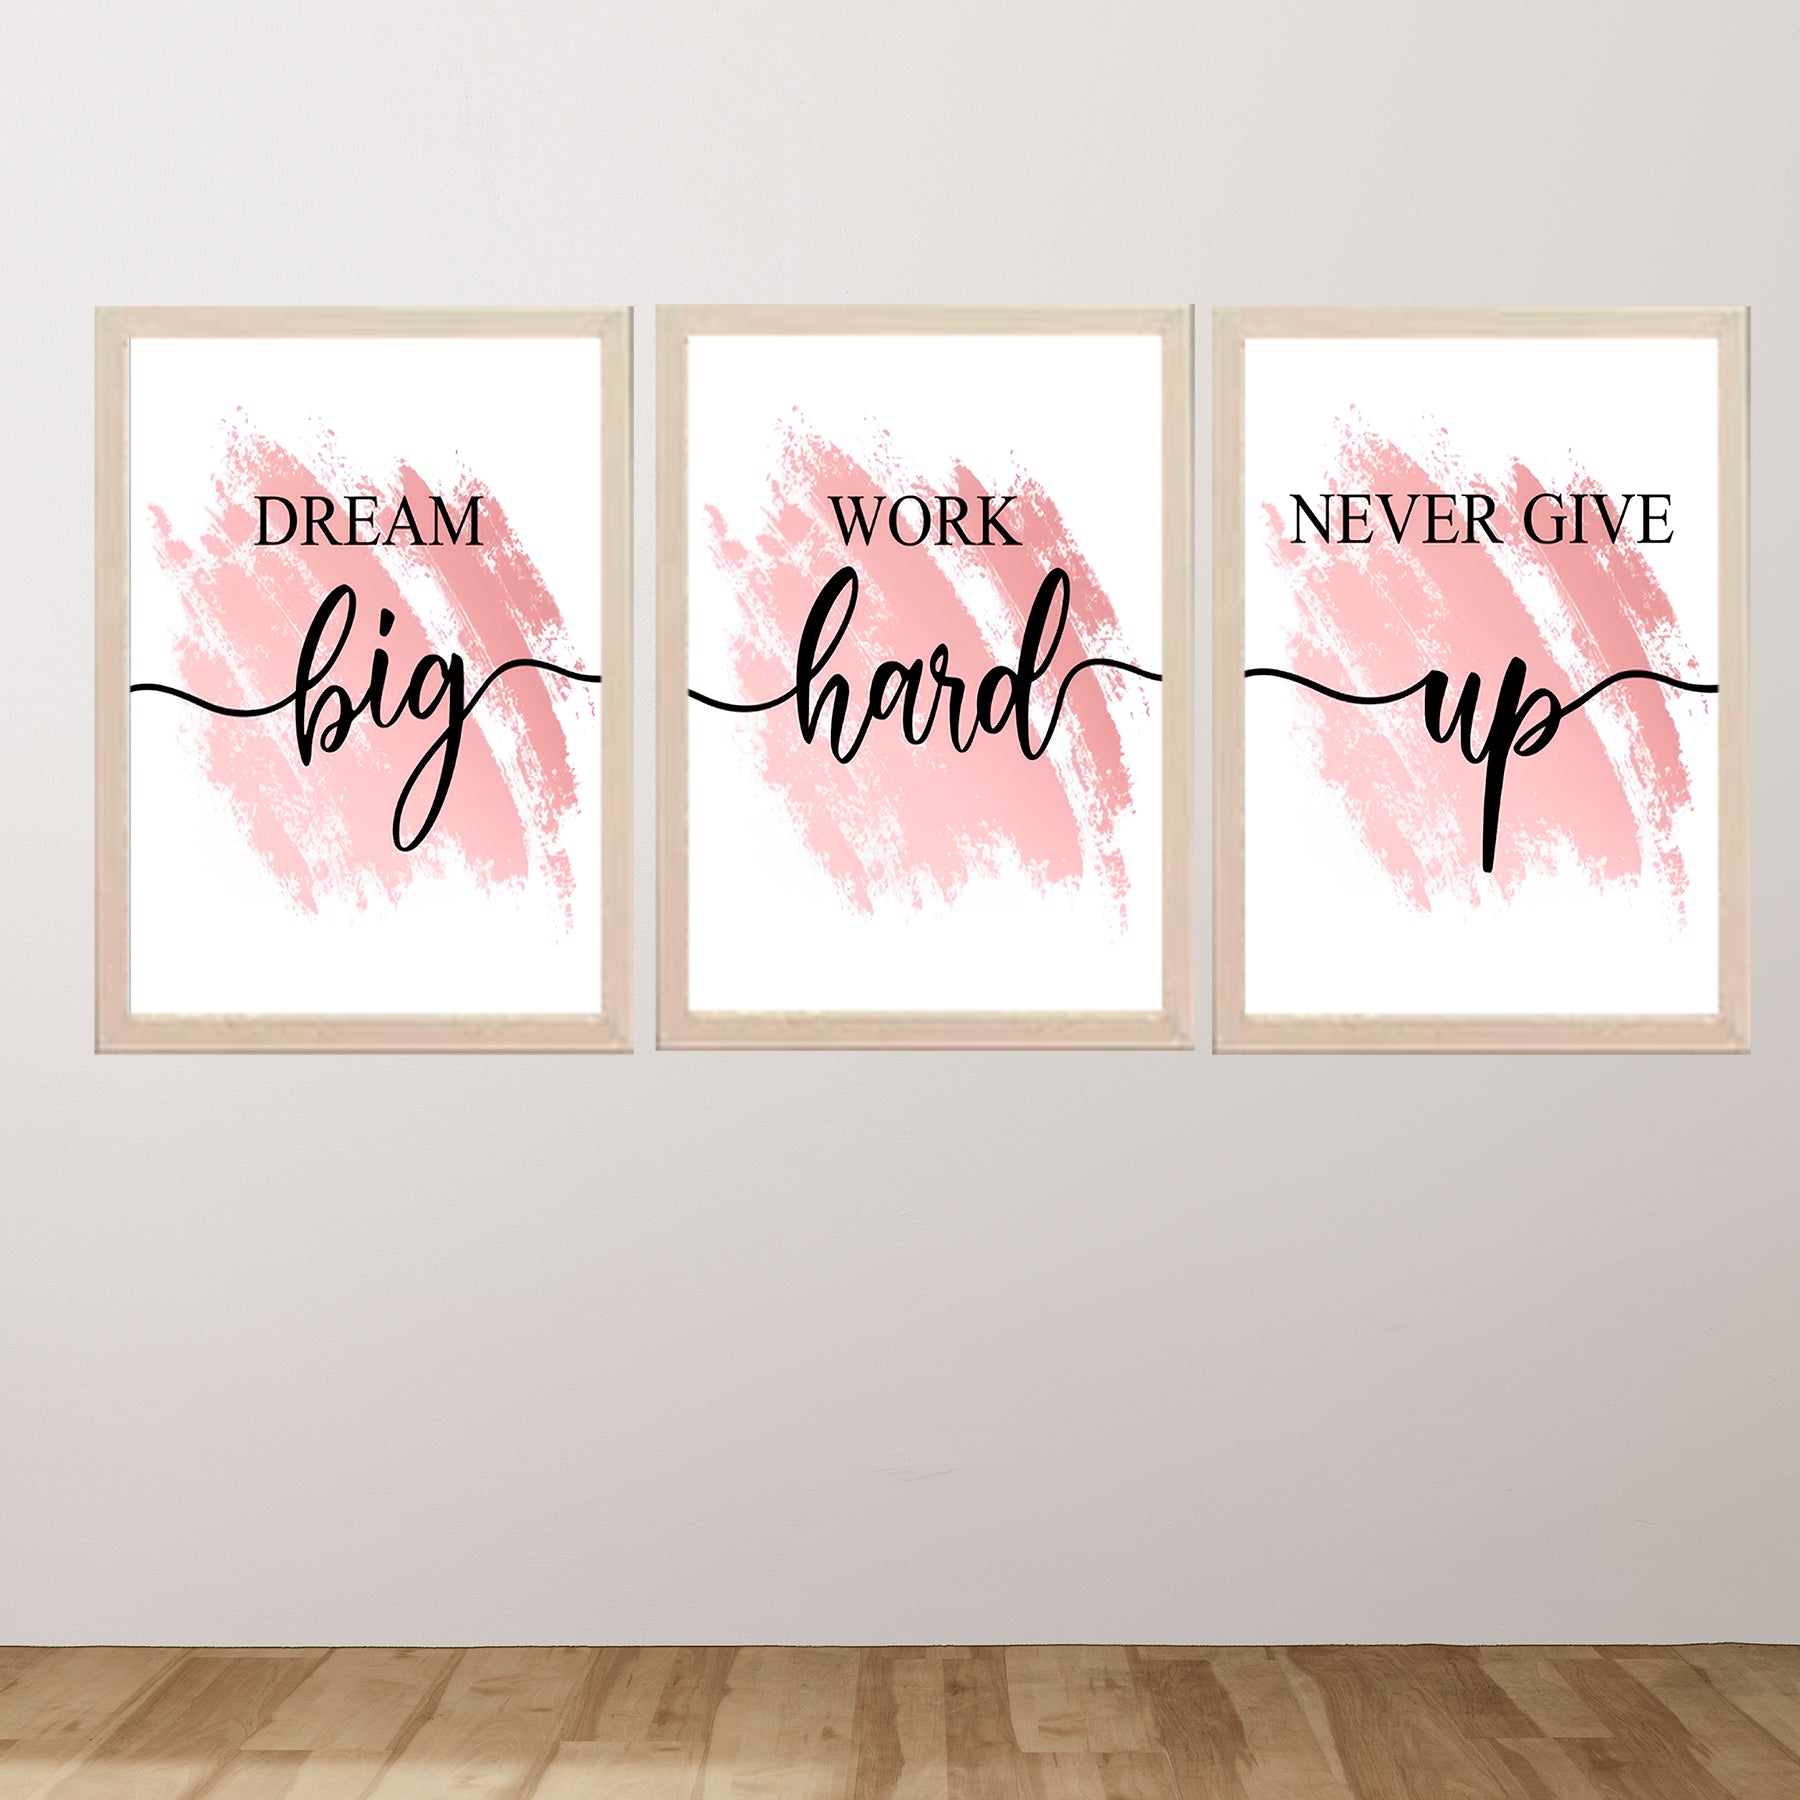 Buy white Motivational Quotes About Success For House &amp; Office Decor Set of 3 Frames